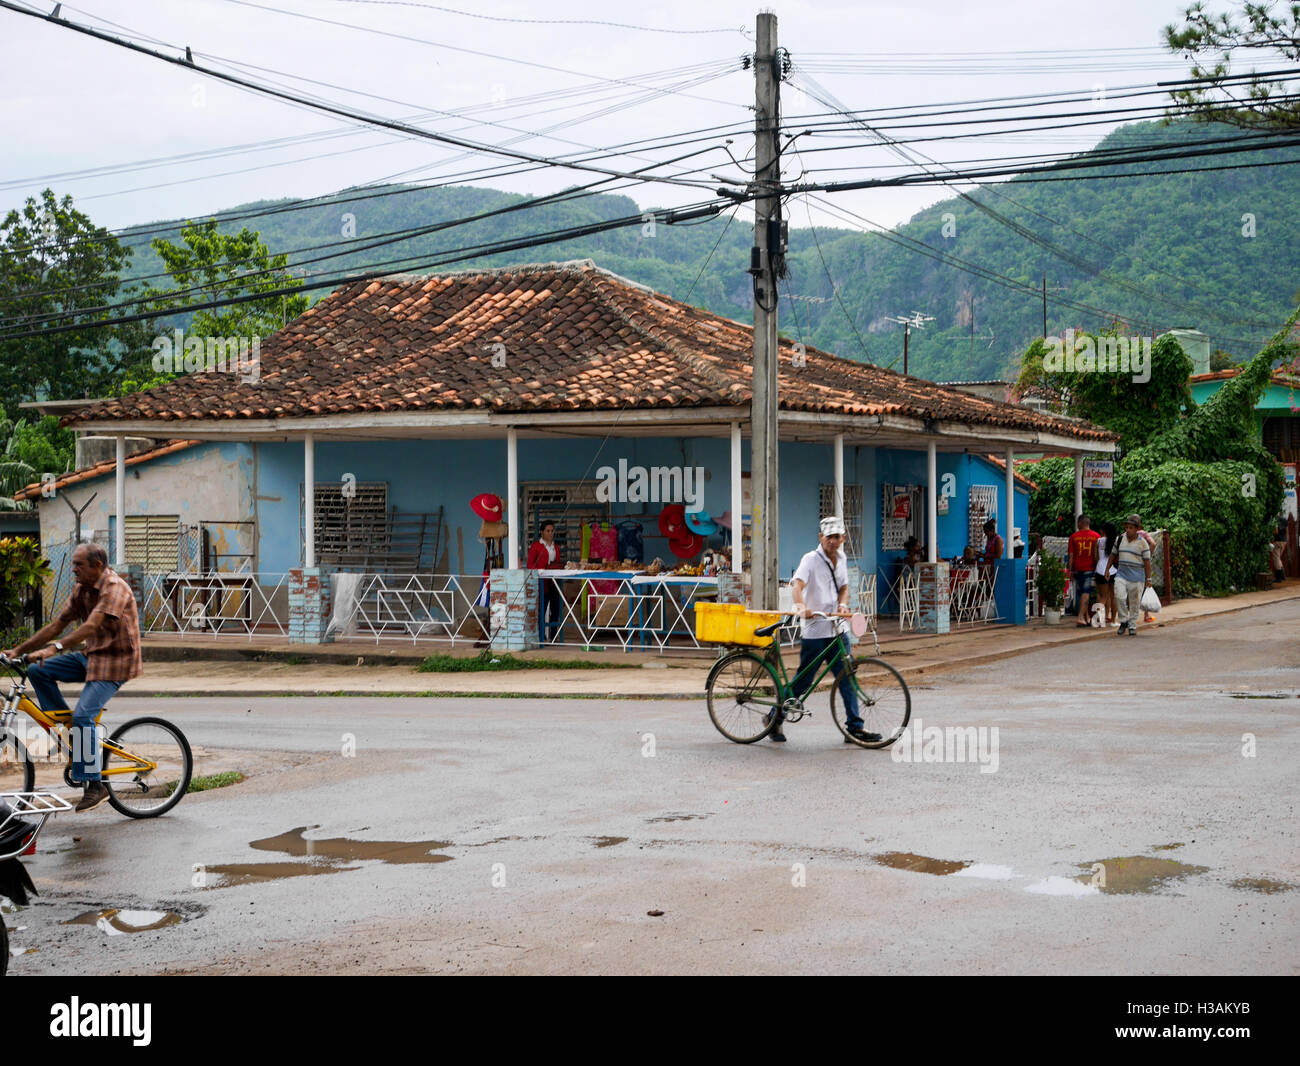 Cuban scenery, people are living their life on the streets, with a mountains in a background. Stock Photo